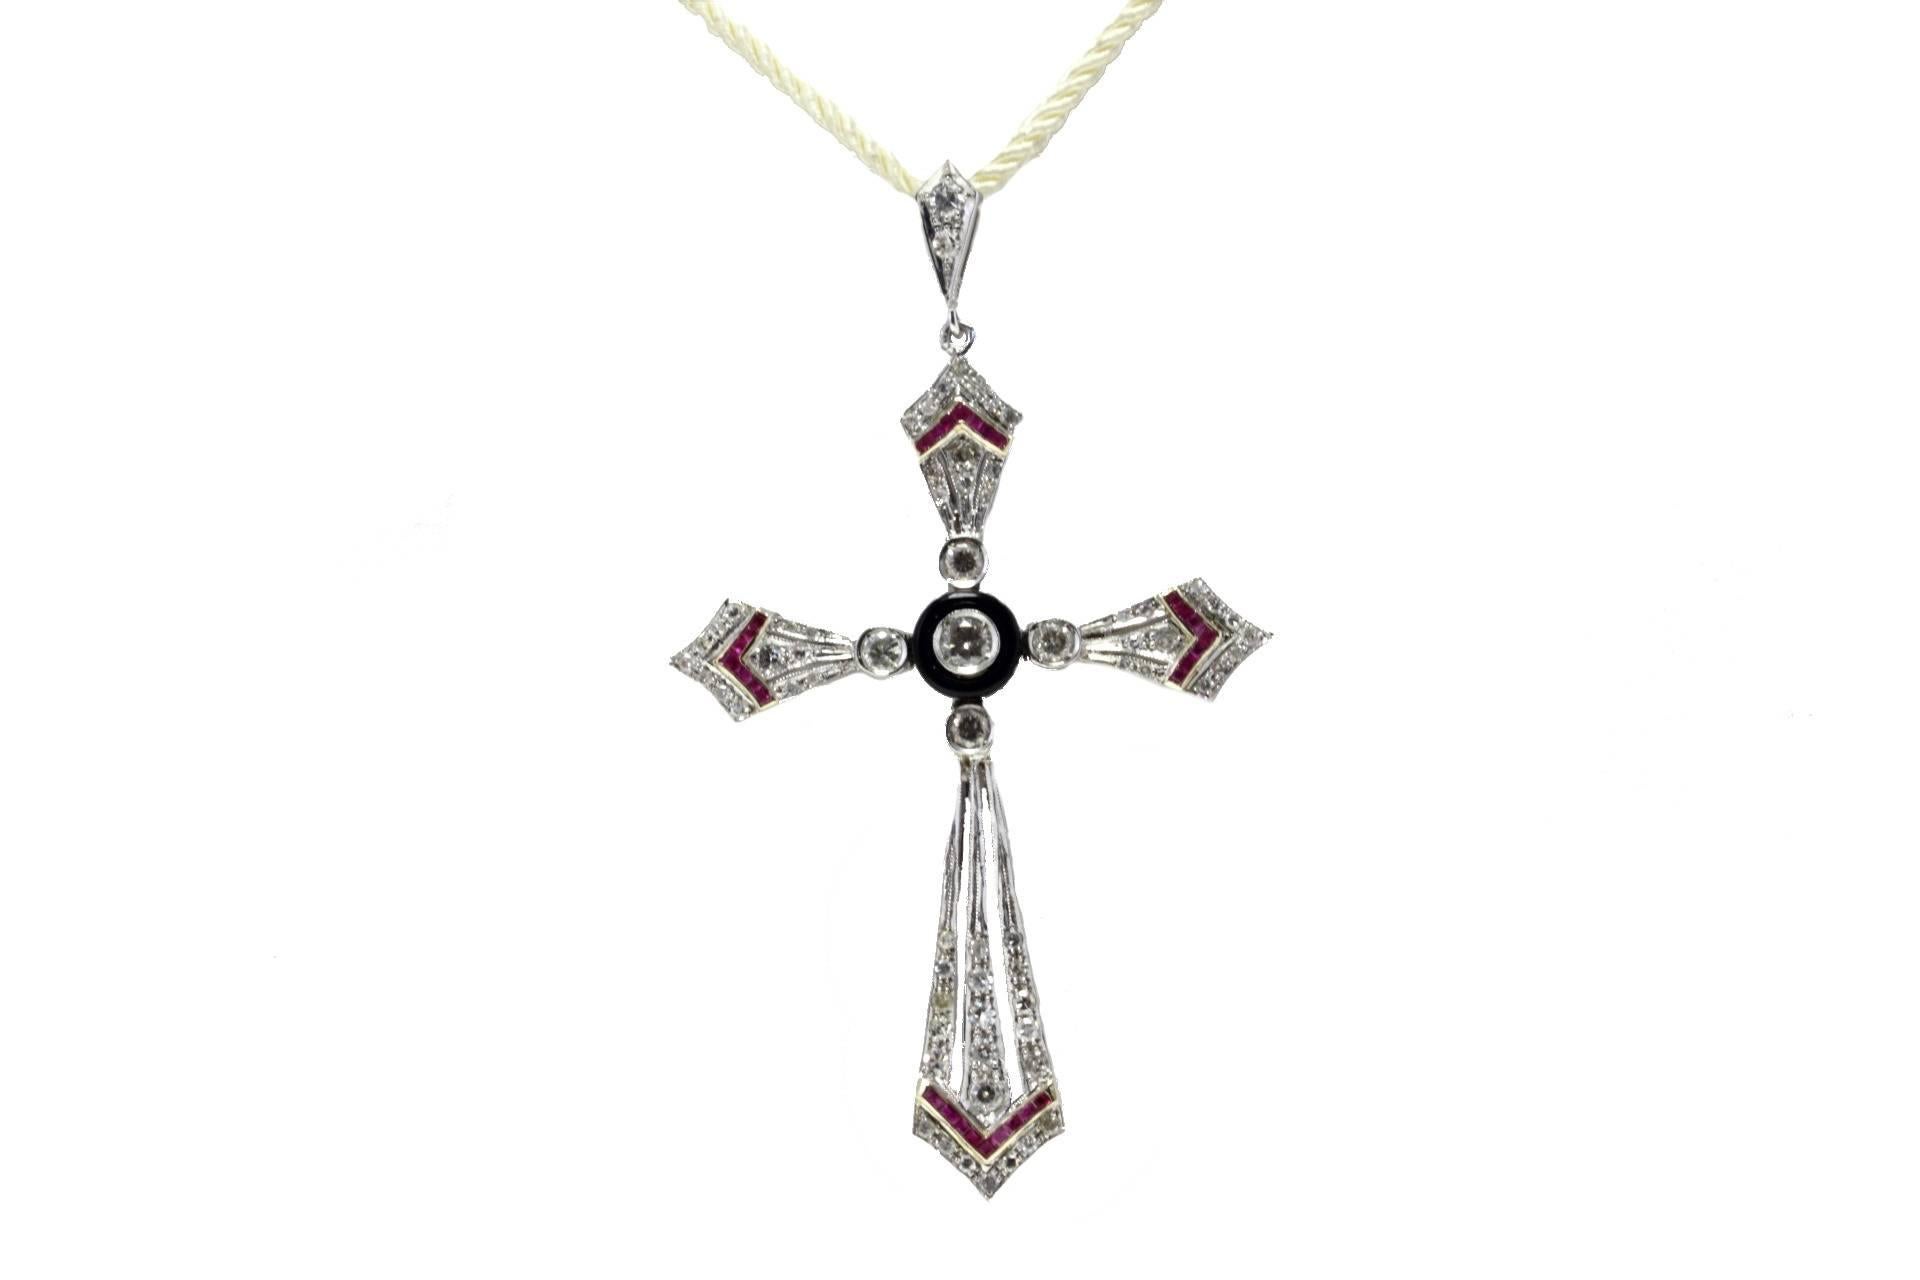 SHIPPING POLICY:
No additional costs will be added to this order.
Shipping costs will be totally covered by the seller (customs duties included).

Diamonds cross pendant in 14kt white and yellow gold embellished with rubies stripes and a centra disc